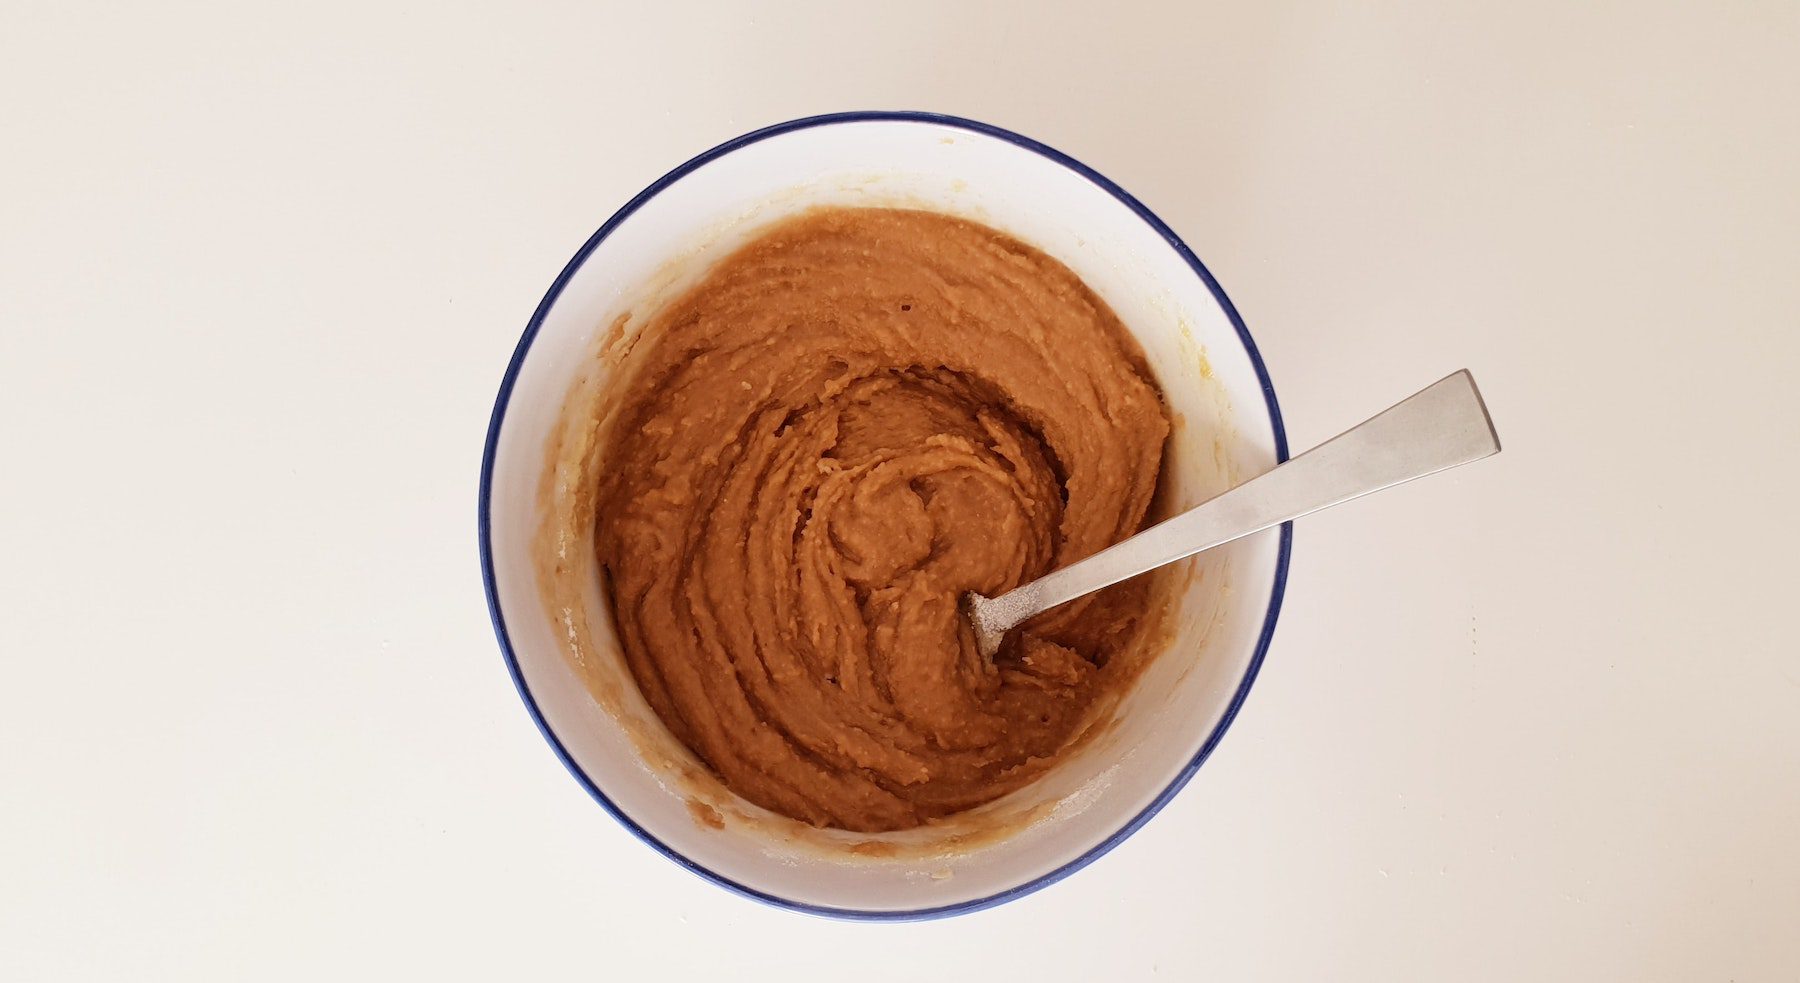 Natural ground peanut butter in a ceramic dish with spoon.